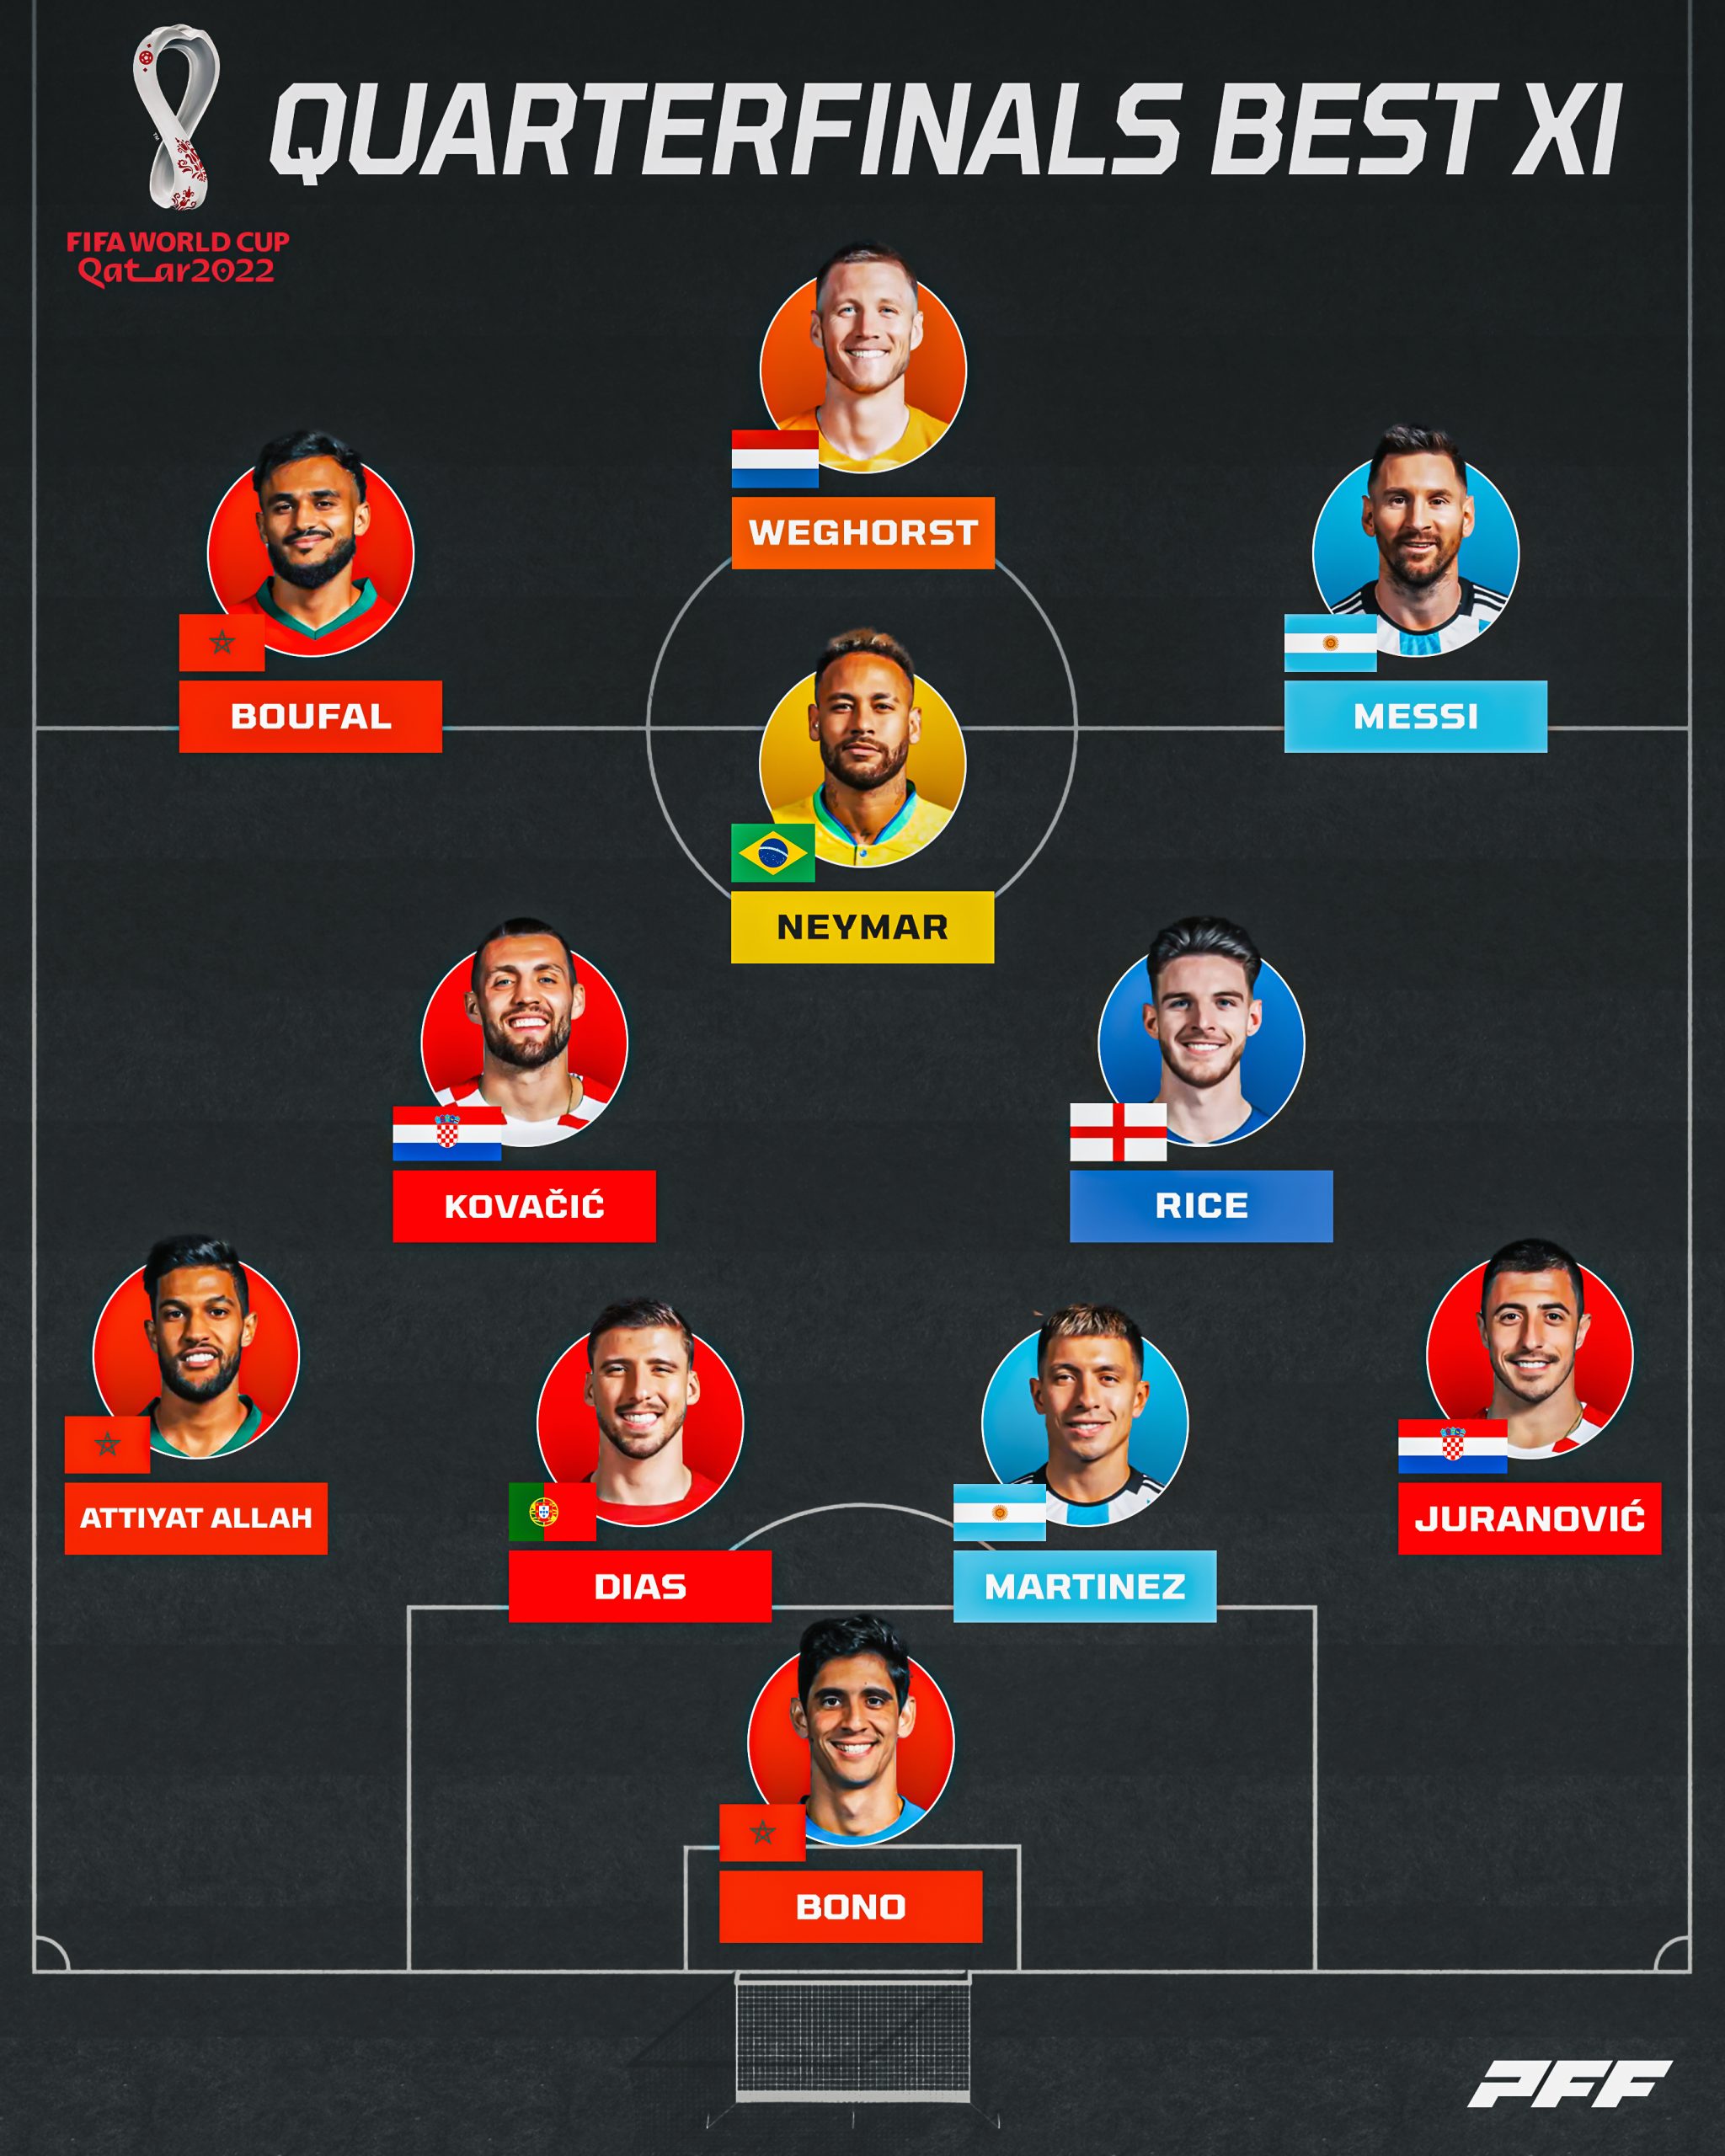 FIFA World Cup 2022 Teams: FIFA World Cup 2022: See which teams